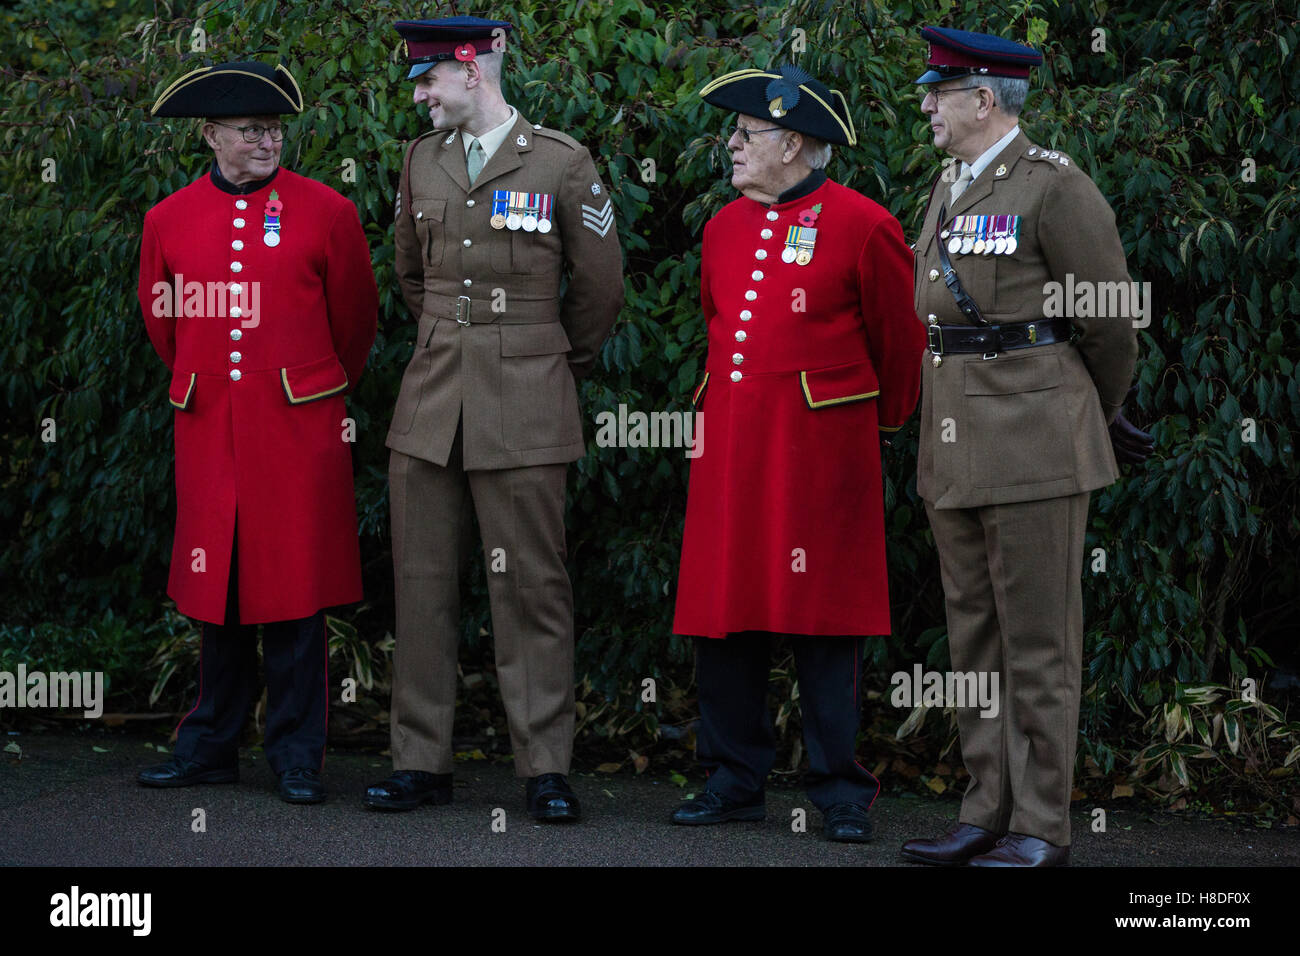 London, UK. 10th November, 2016. Soldiers and Chelsea Pensioners at the dedication of Kensington Memorial Park by the Royal Borough of Kensington and Chelsea to the Centenary Fields programme. Centenary Fields honours the memory of the millions who lost their lives during the First World War by securing and protecting outdoor recreational space in perpetuity for the benefit of future generations. Credit:  Mark Kerrison/Alamy Live News Stock Photo